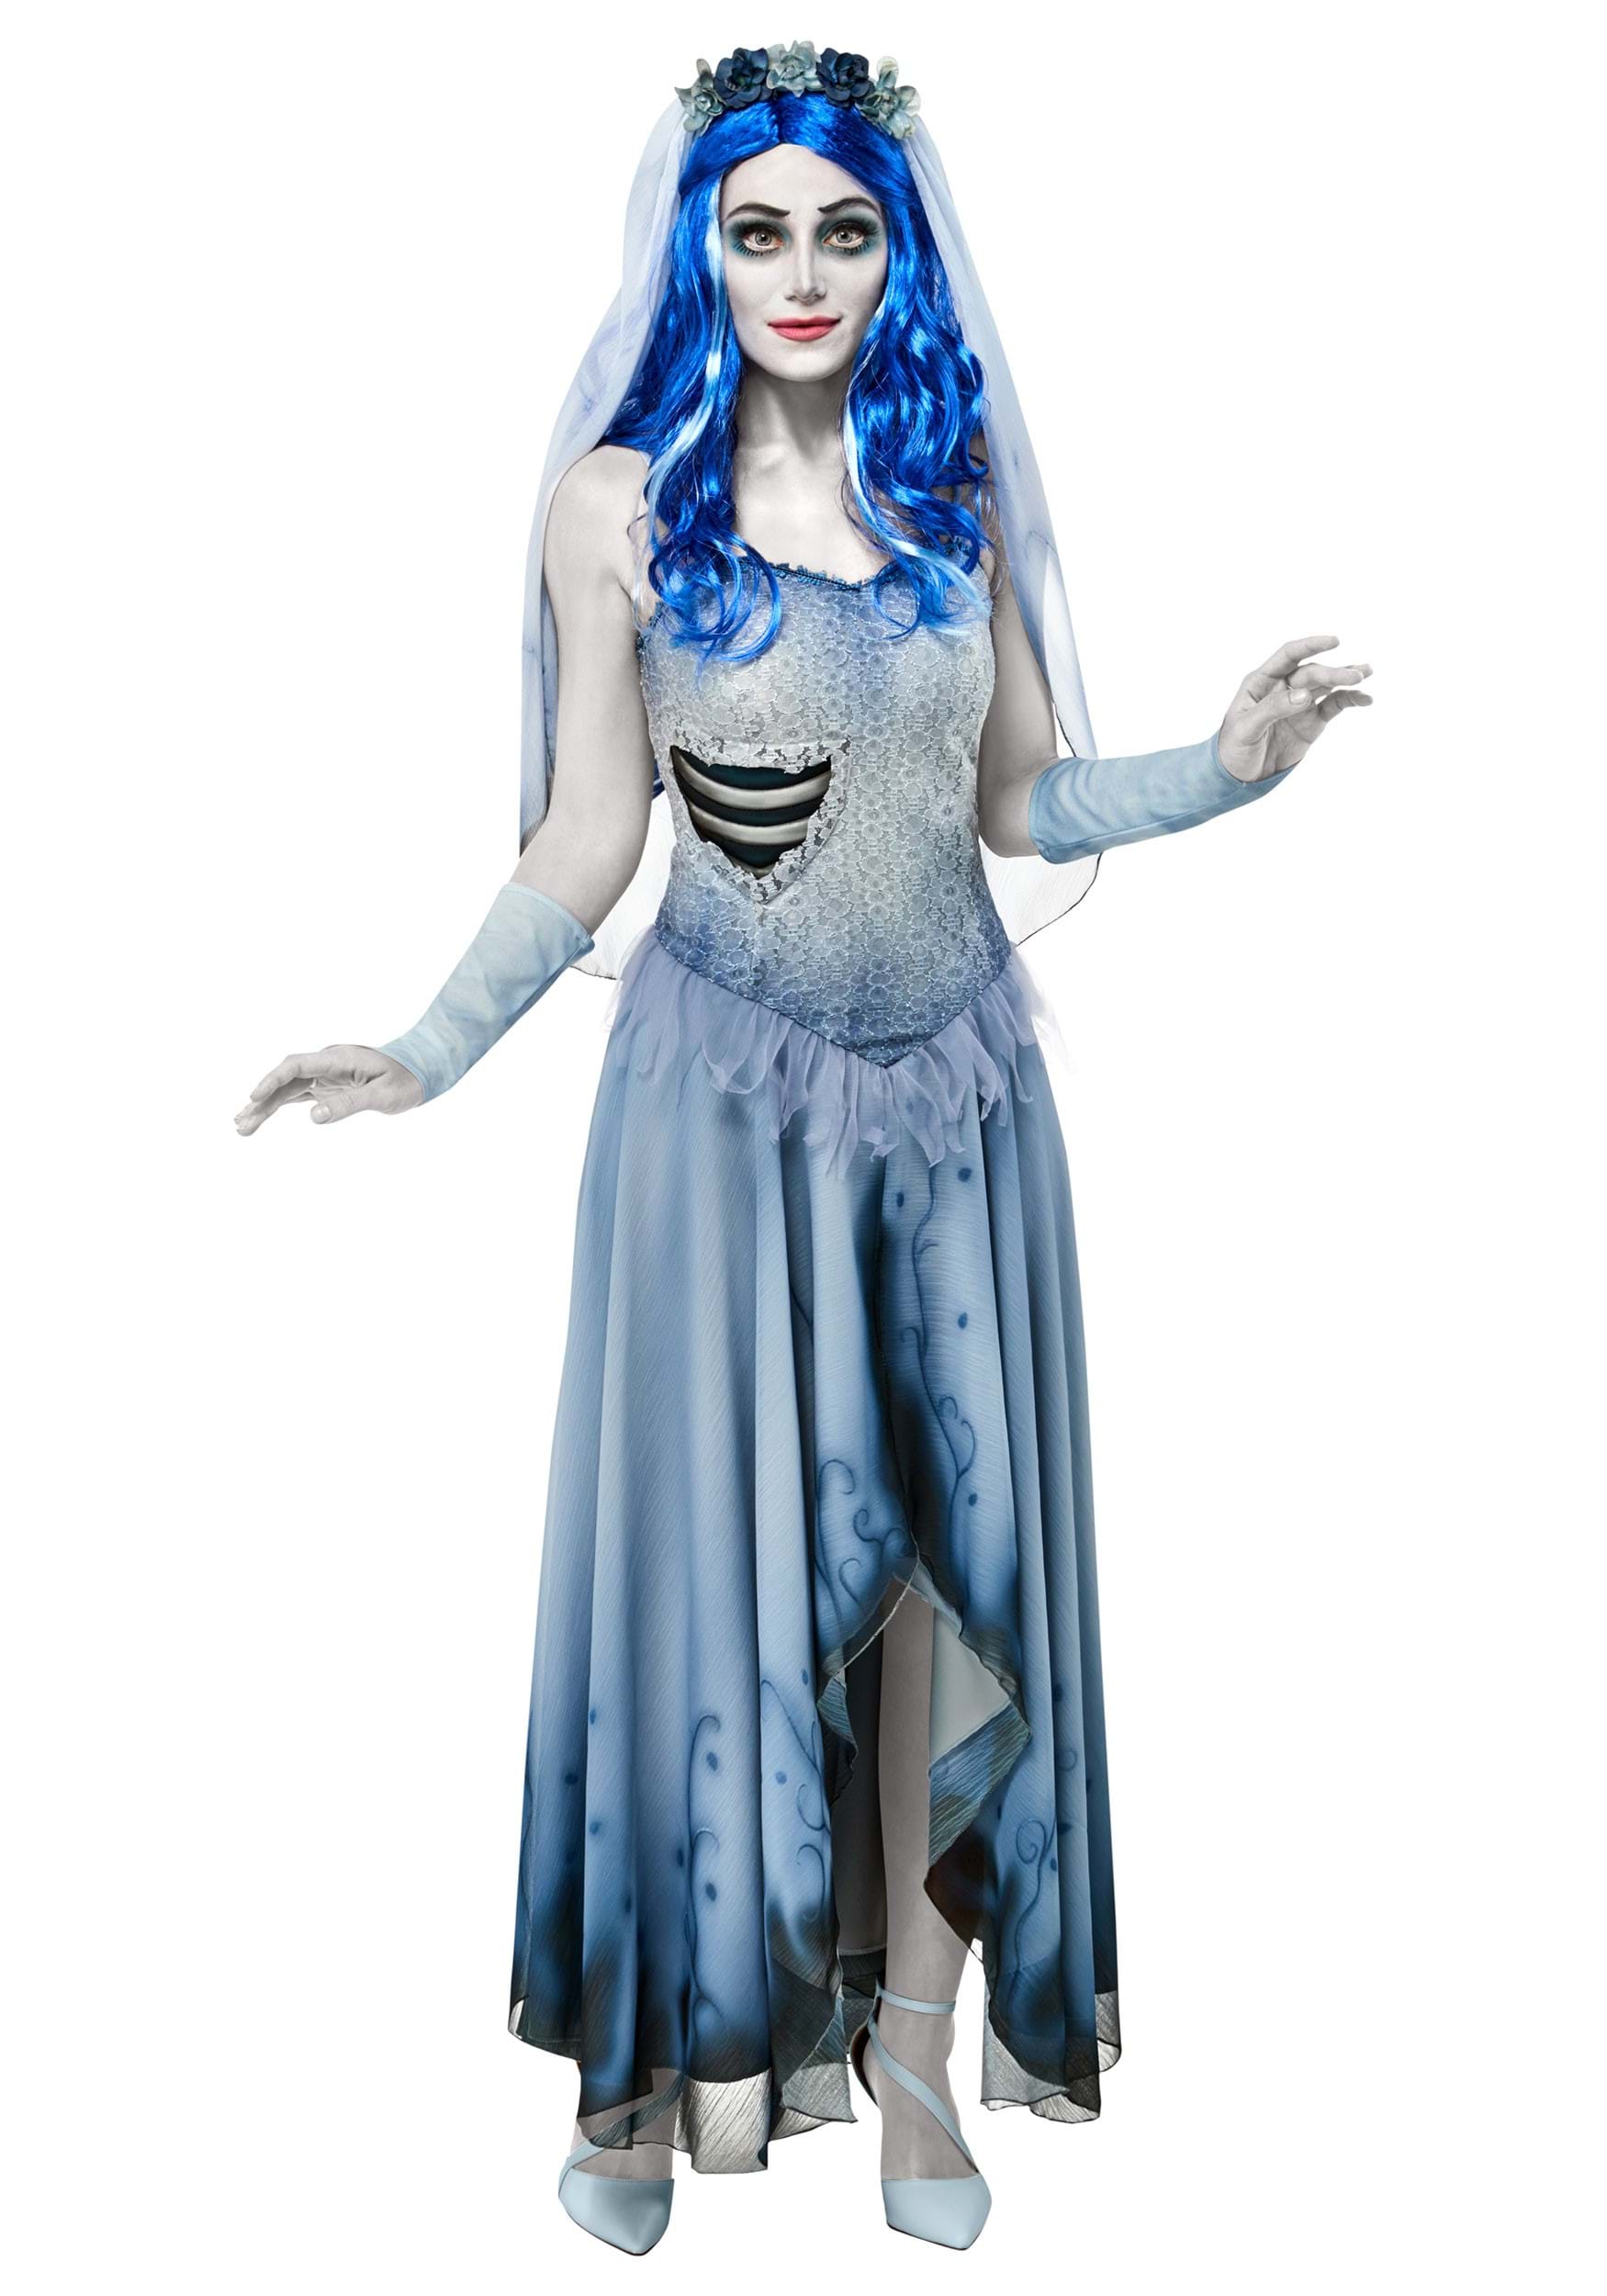 https://images.halloweencostumes.com/products/91905/1-1/womens-corpse-bride-costume-dress.jpg